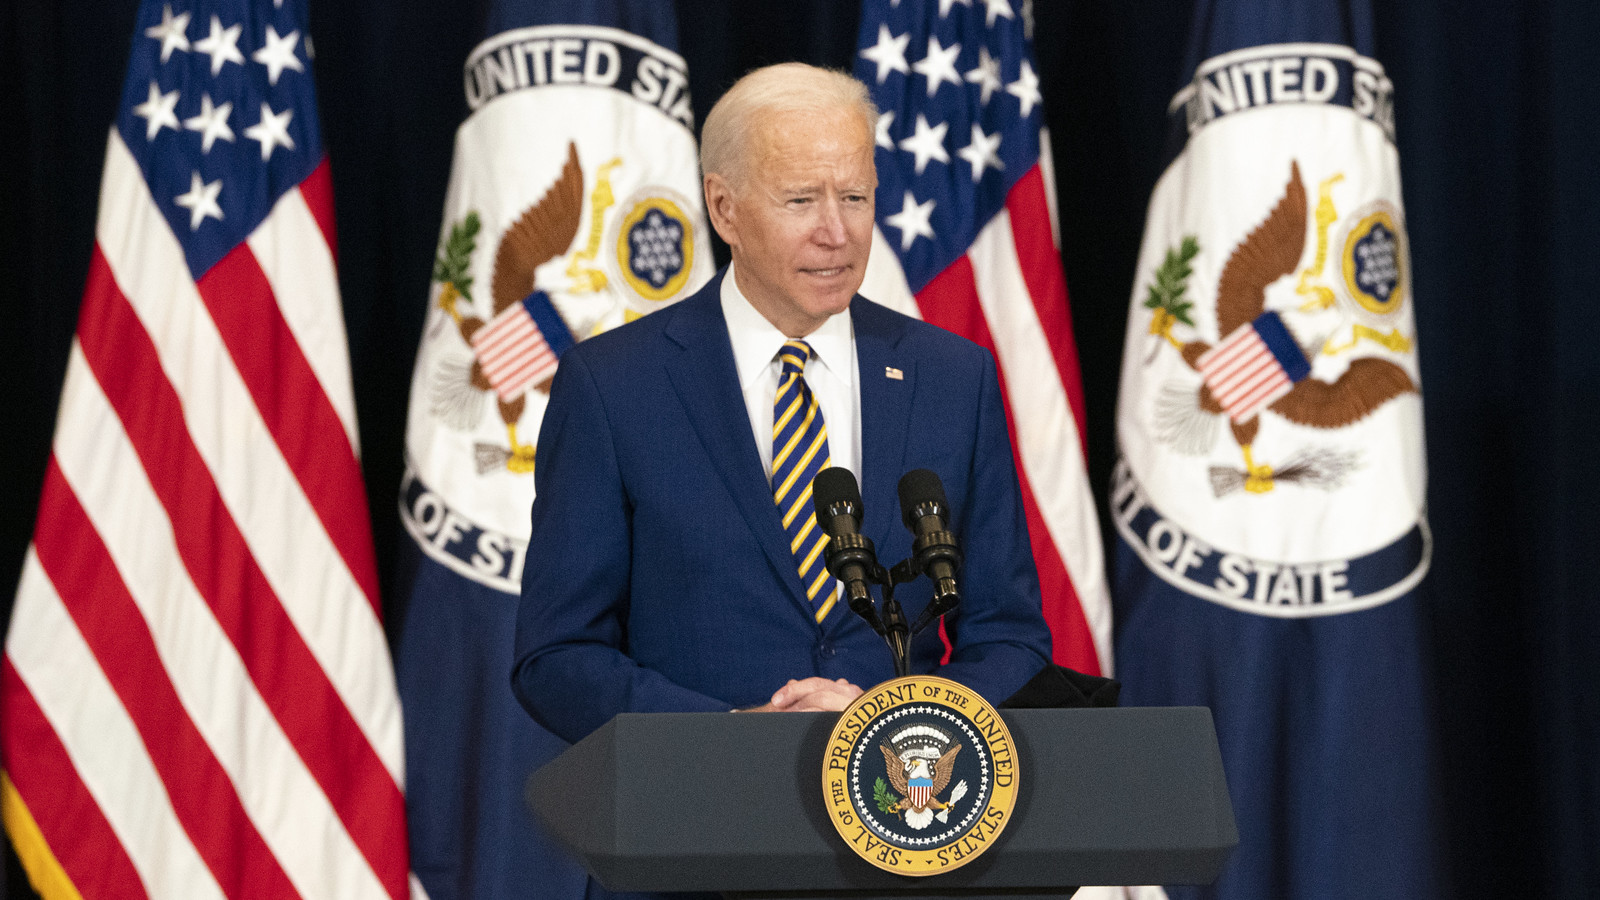 President Joseph R. Biden, Jr., with Vice President Kamala K. Harris and Secretary of State Antony J. Blinken, delivers remarks to State Department employees, at the U.S. Department of State in Washington, D.C., on February 4, 2021. [State Department Photo by Freddie Everett/ Public Domain]